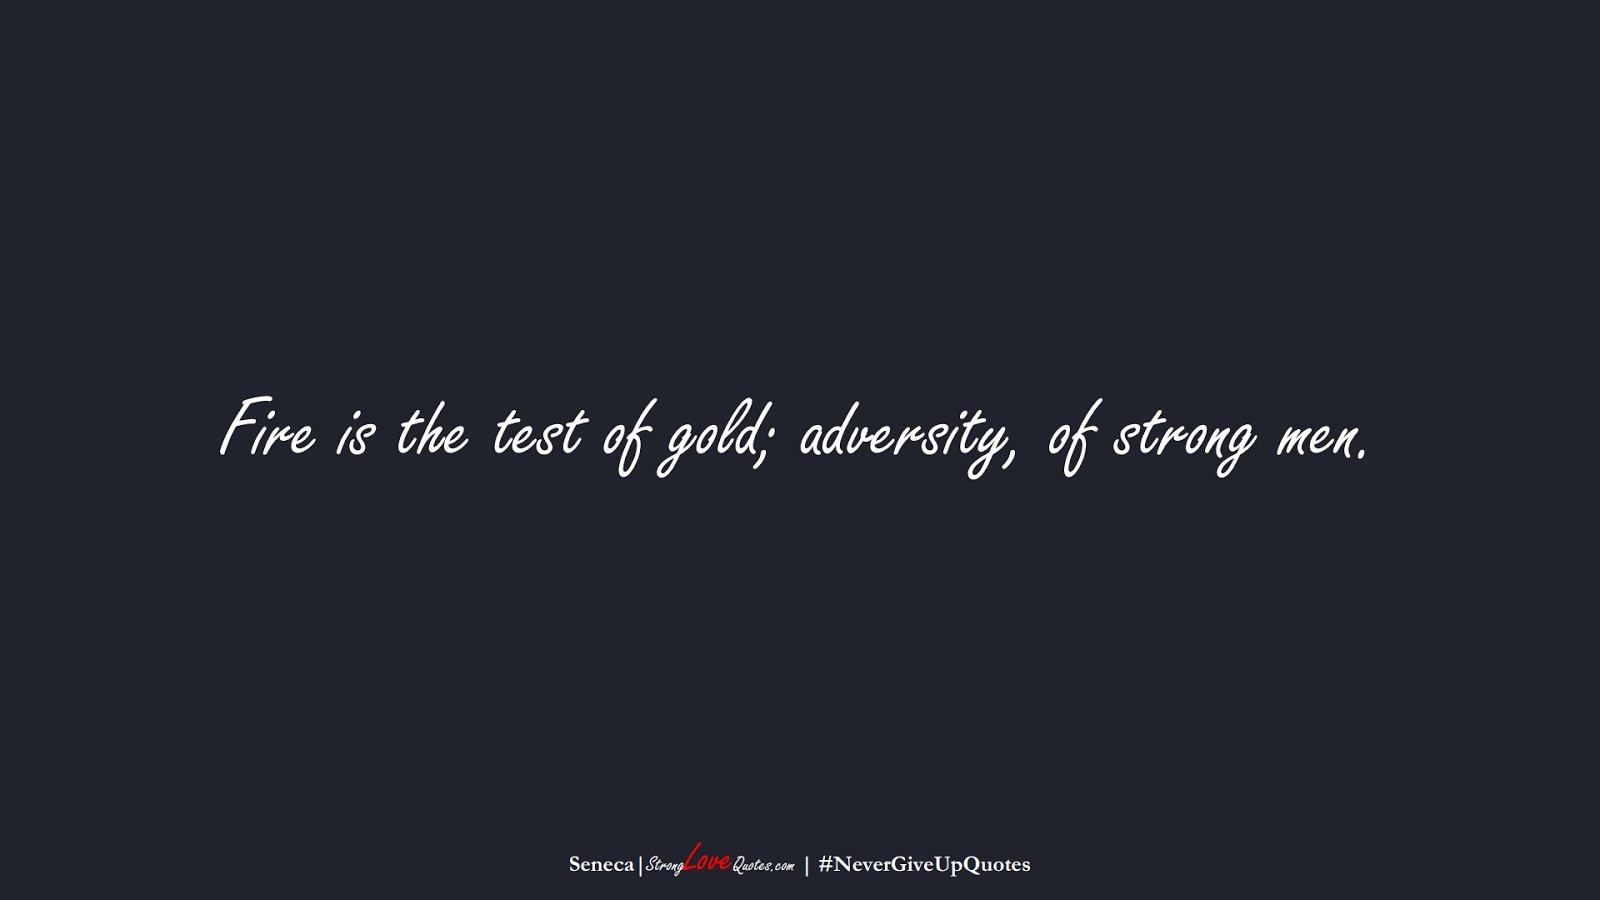 Fire is the test of gold; adversity, of strong men. (Seneca);  #NeverGiveUpQuotes